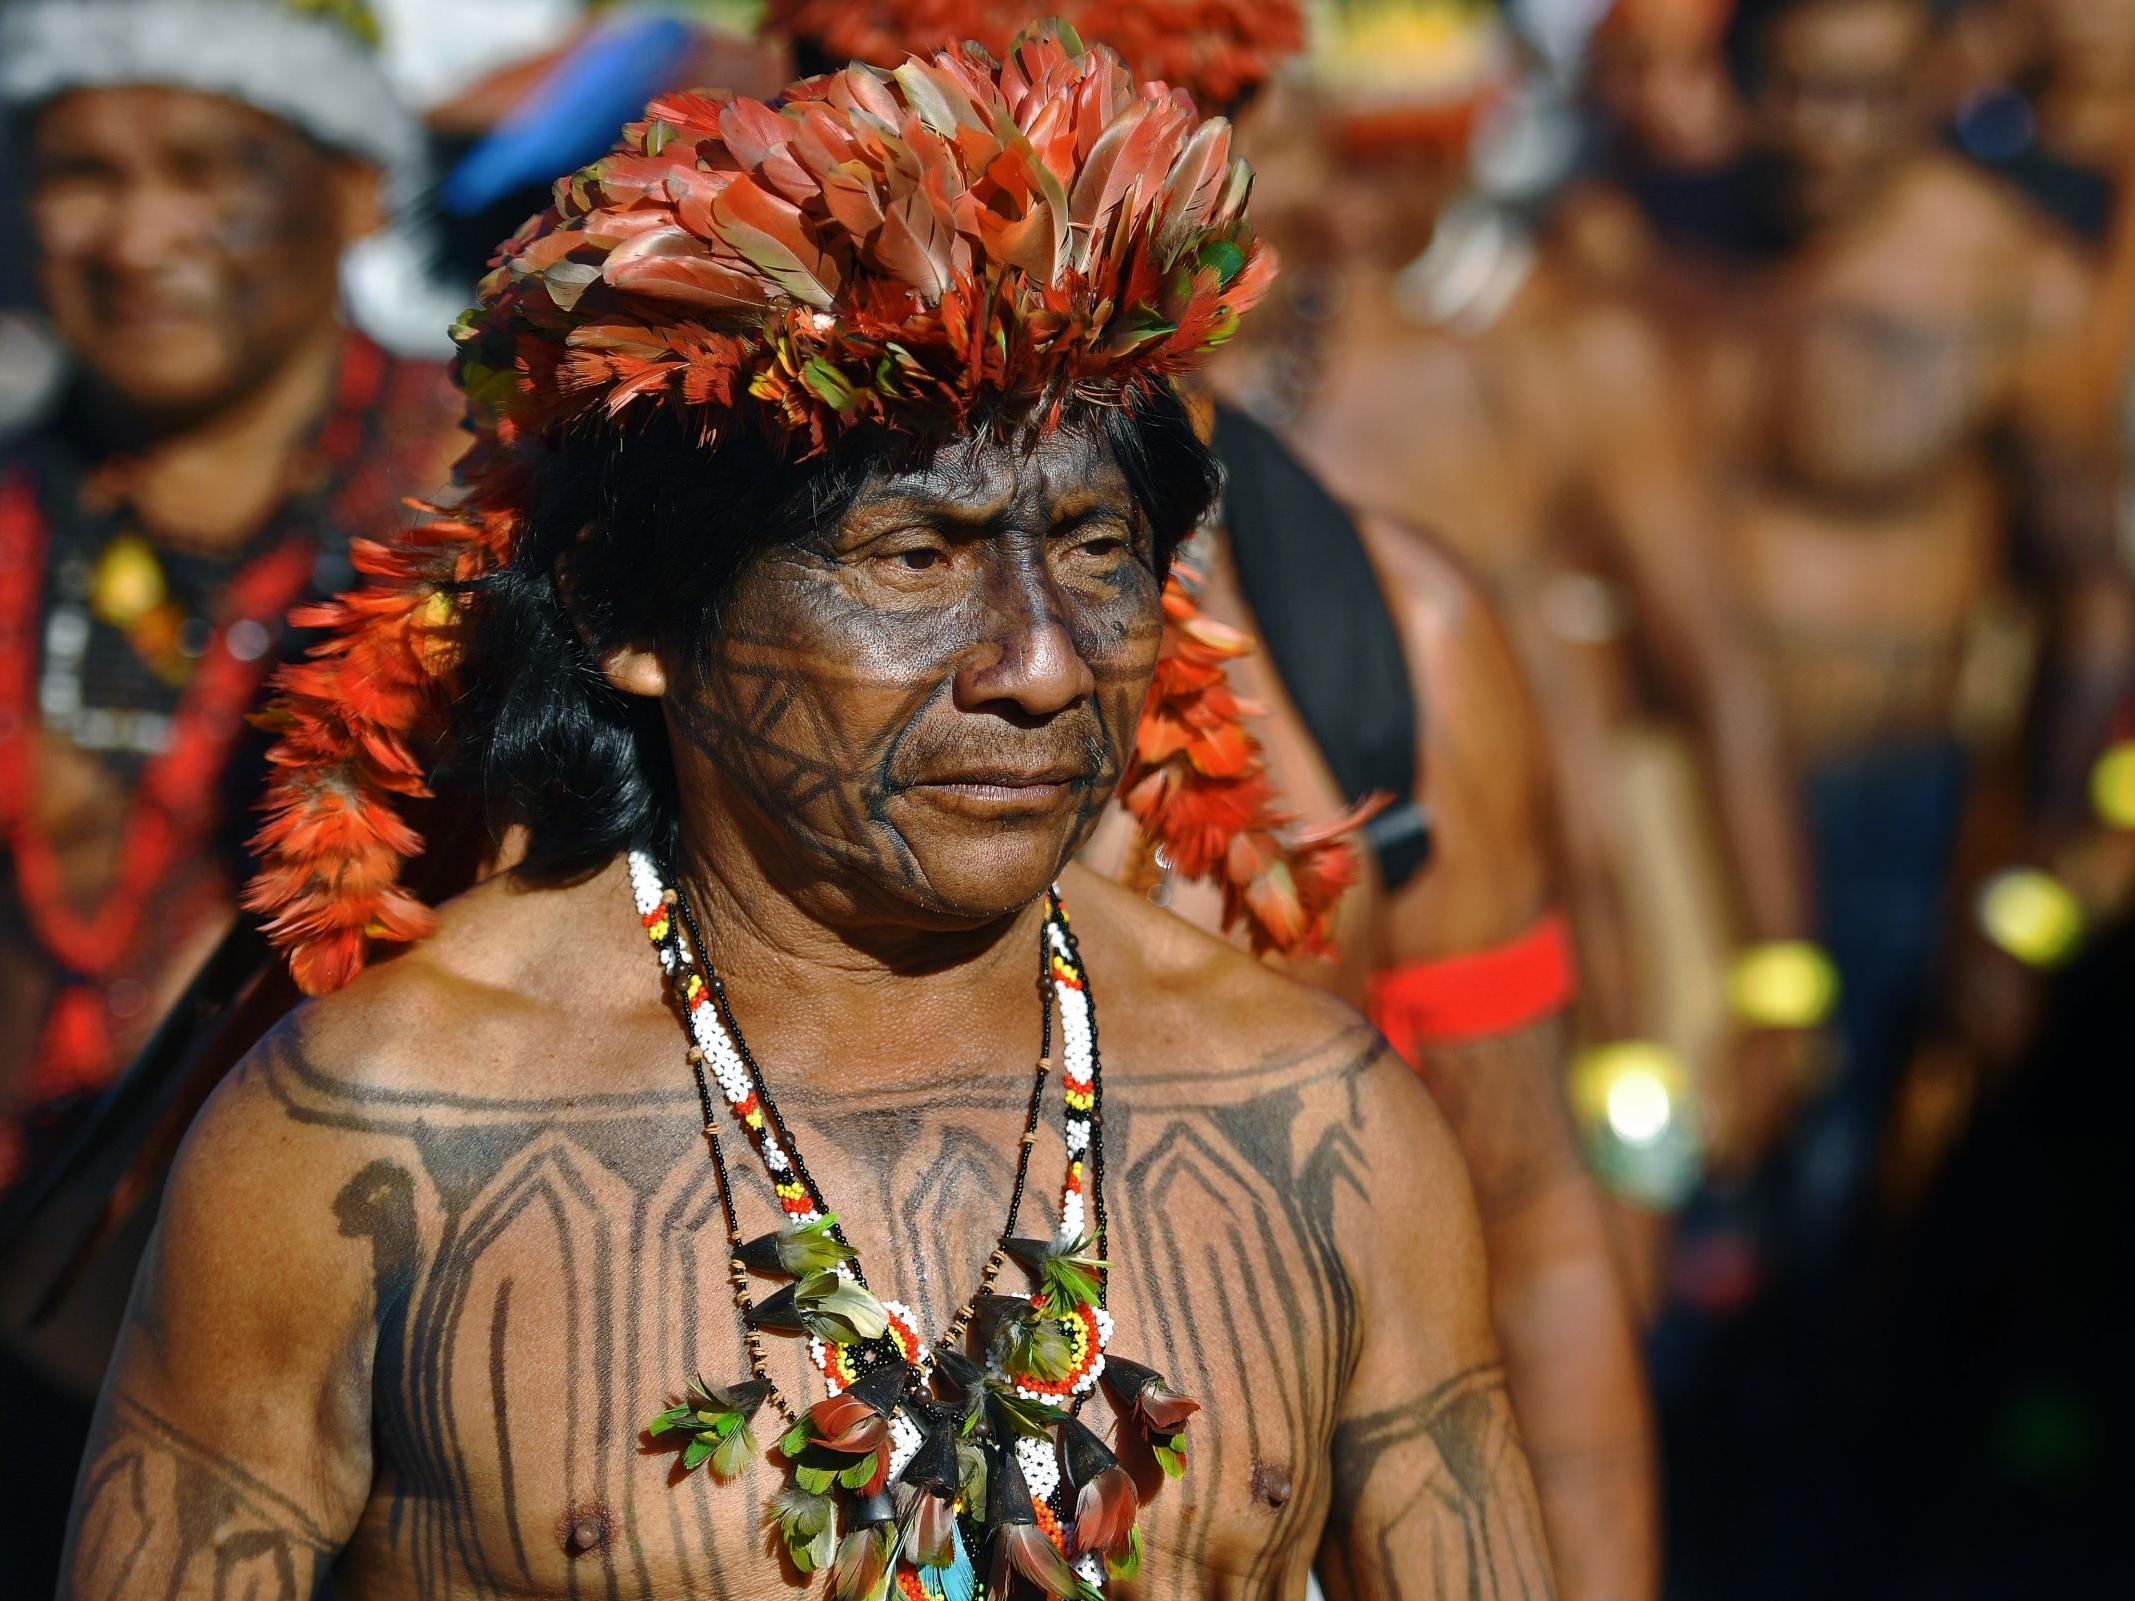 A construction project part of Jair Bolsonaro's plans for the Amazon threatens the existence of the Munduruku tribe